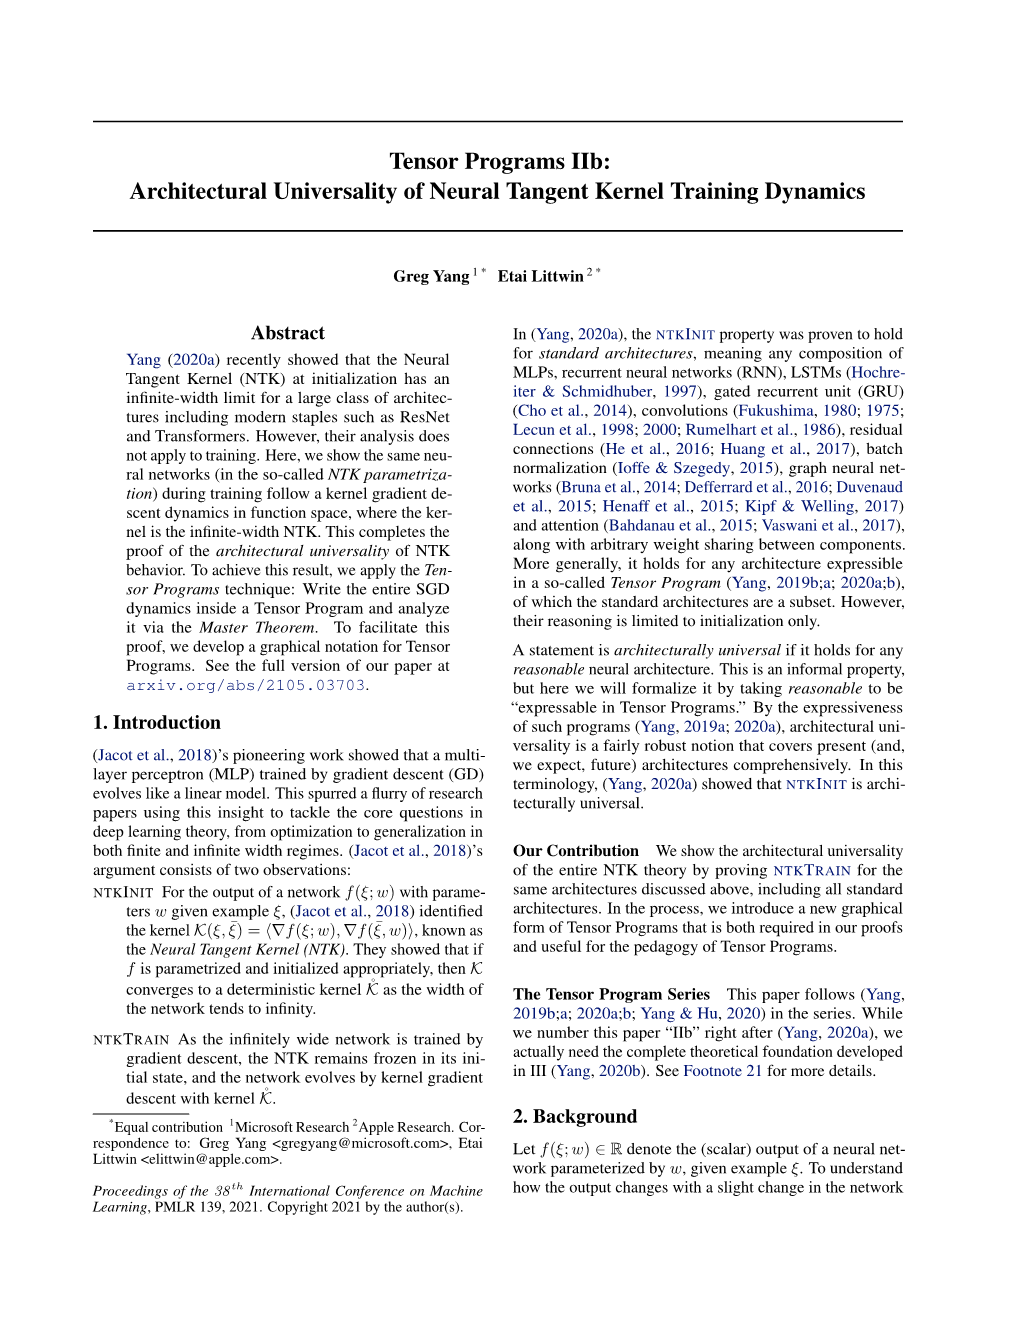 Architectural Universality of Neural Tangent Kernel Training Dynamics